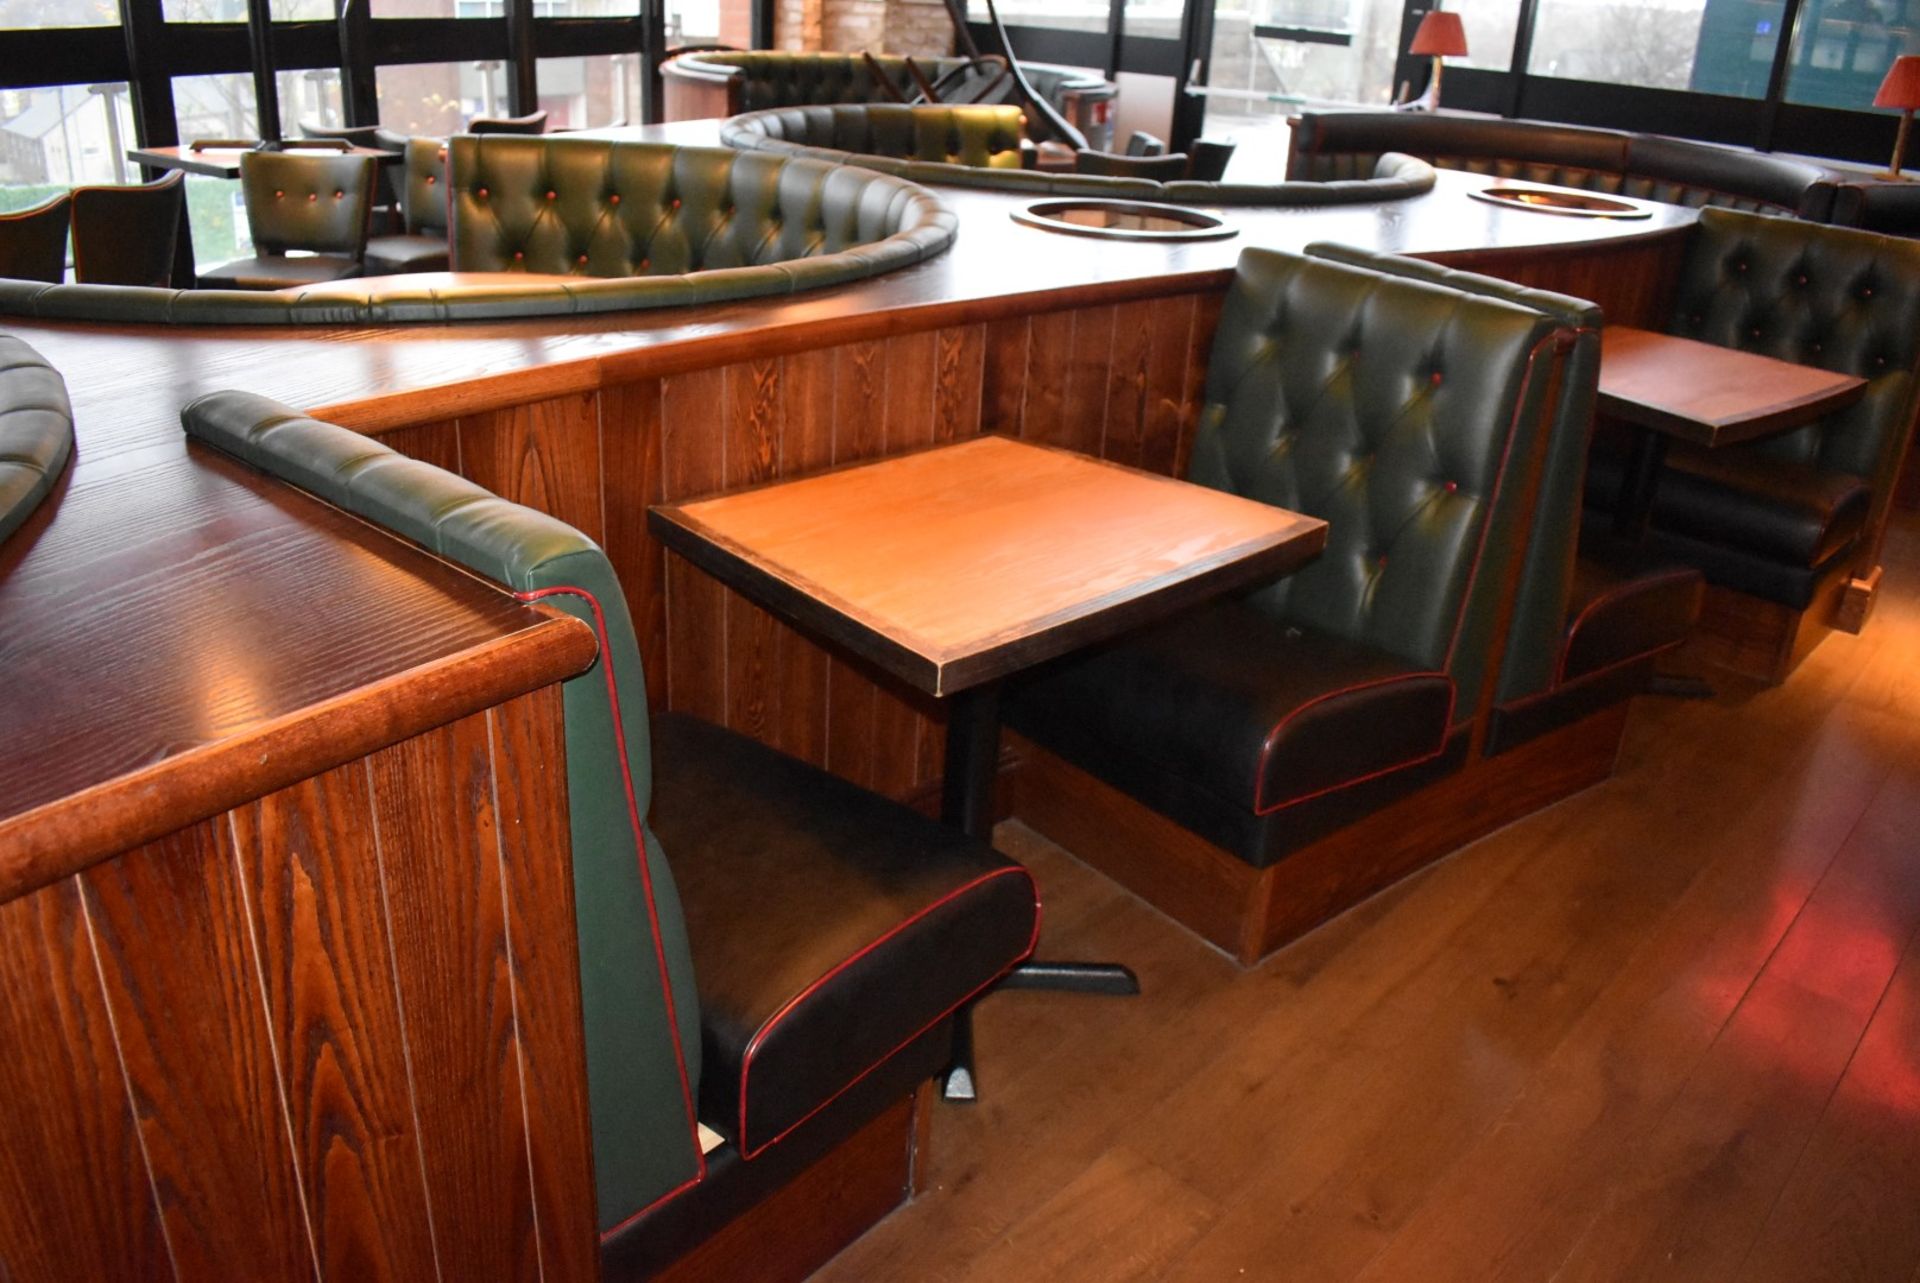 3 x Sections of Restaurant Single Seat Booth Seating With 2 x Tables - Image 3 of 9